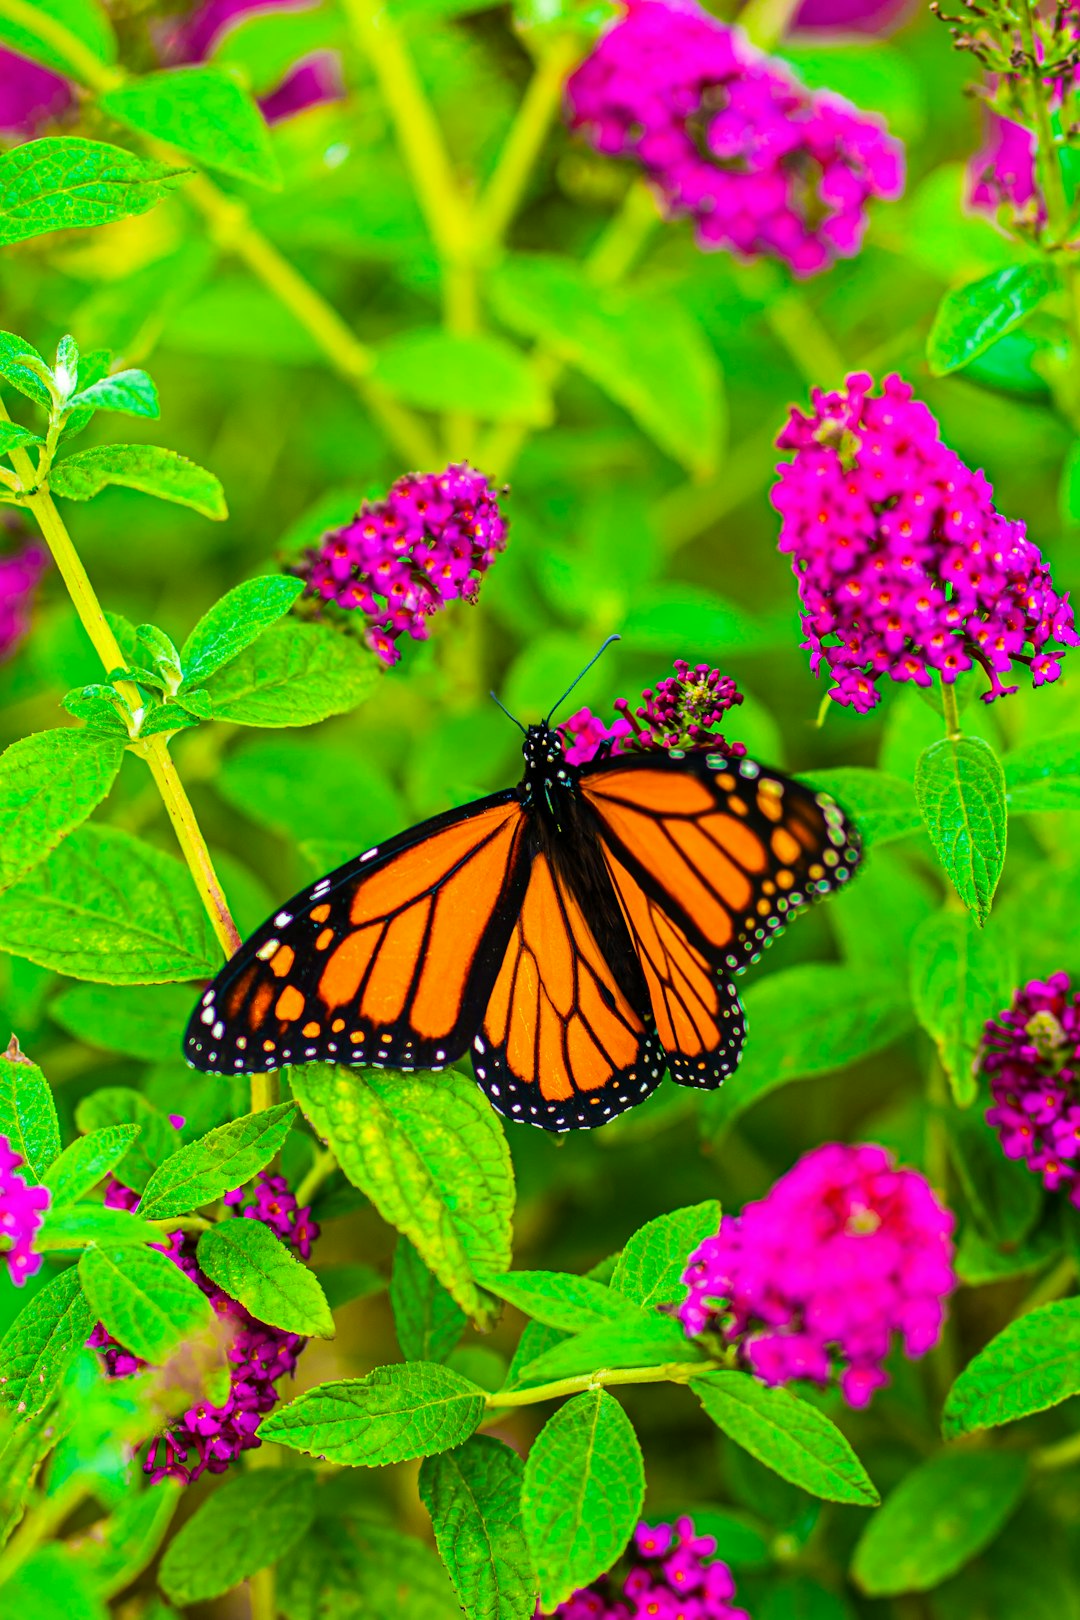 A Monarch butterfly eating sweet nectar from a butterfly bush